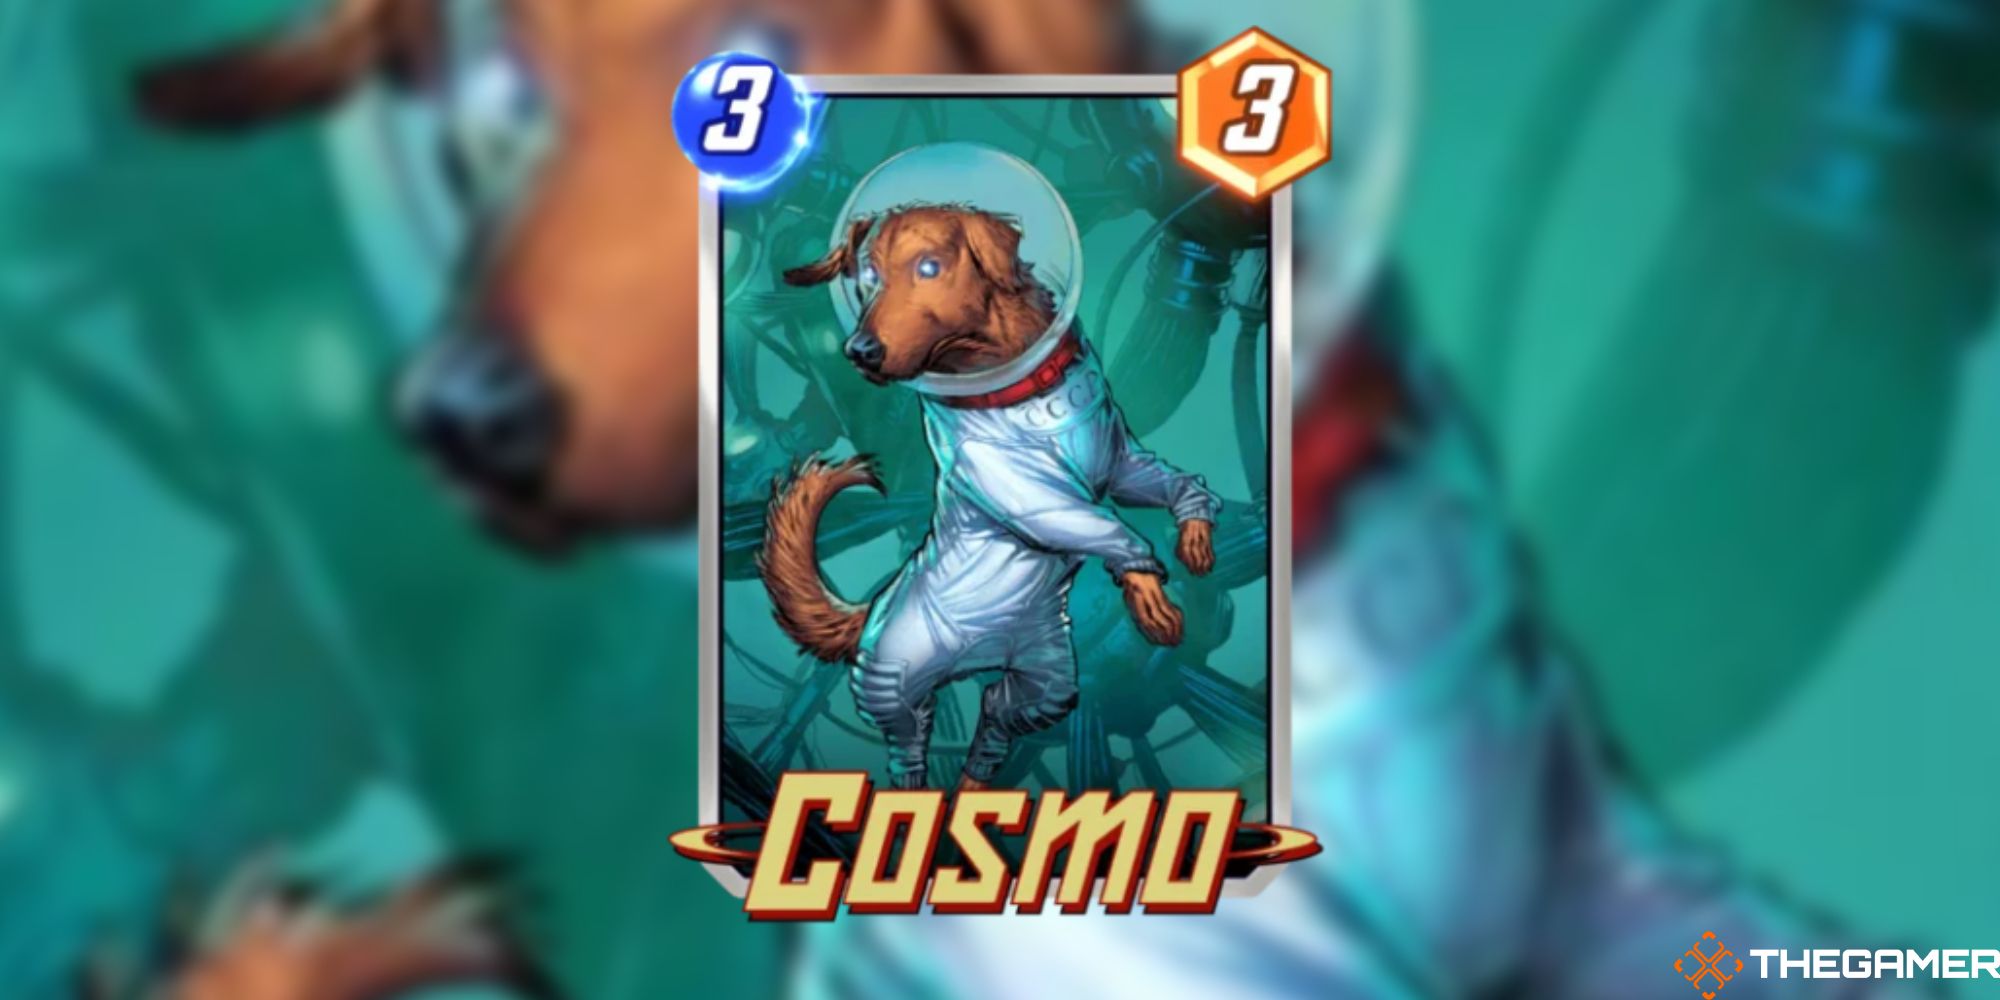 Marvel Snap - Cosmo on a blurred background